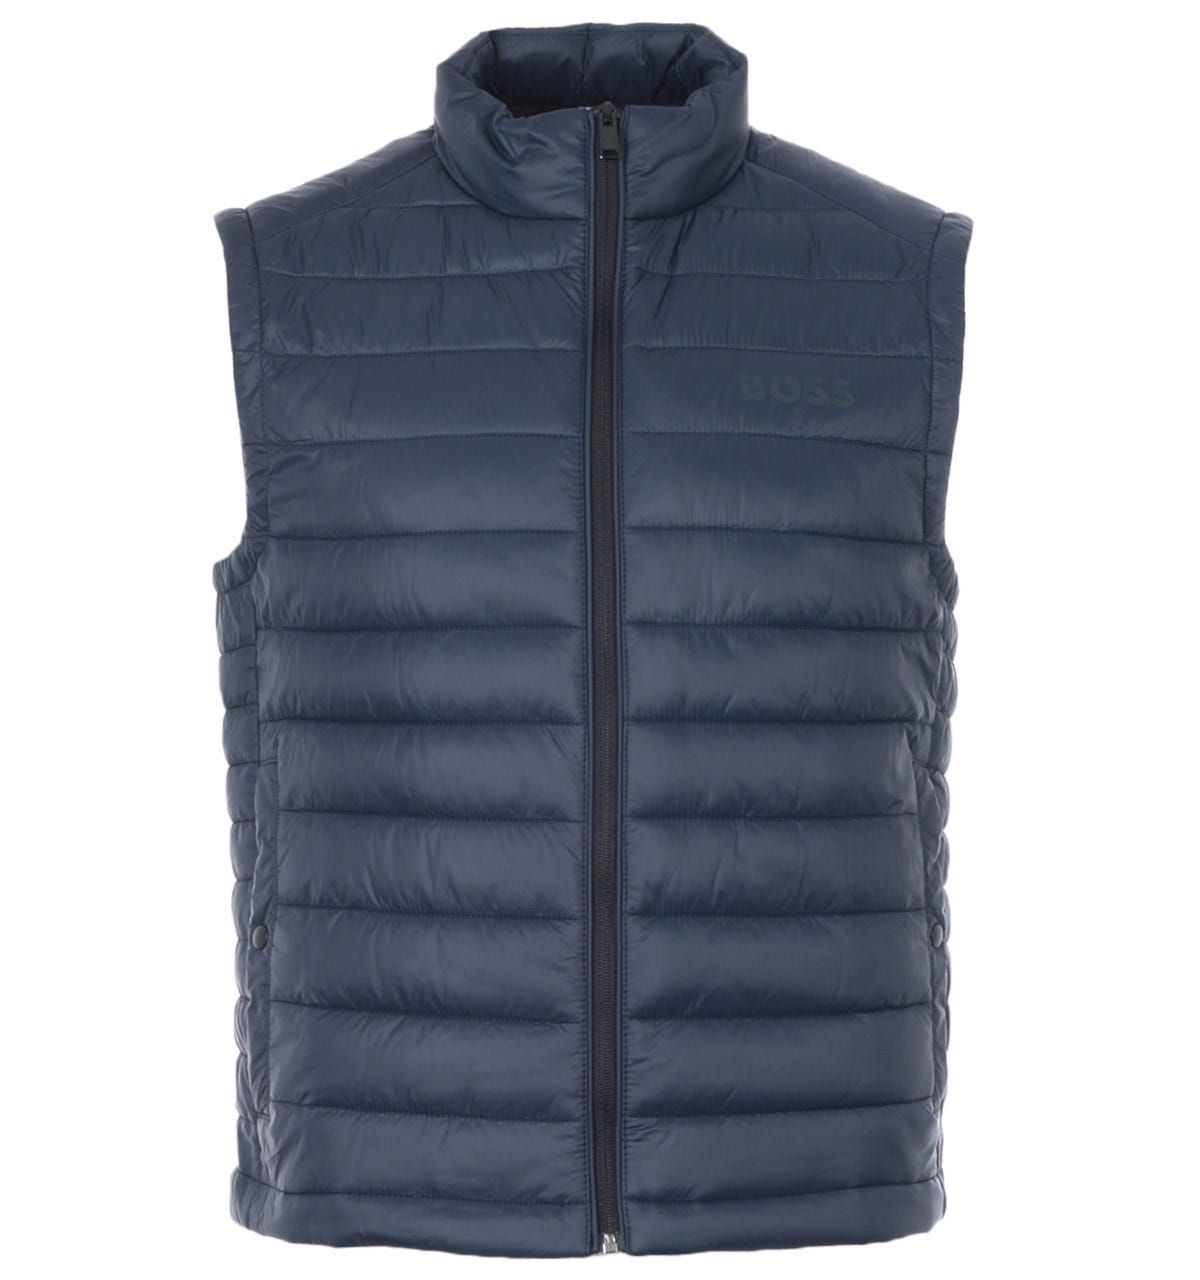 Functional and stylish this padded gilet from BOSS is perfect to refresh your outerwear this season. Crafted from a water resistant nylon shell, keeping you warm and dry. Featuring a stand up collar, full zip closure, twin side welt pockets, and internal pocket. Finished with subtle brand new BOSS logo at the chest.Regular Fit, Water Repellent Nylon Shell, Stand Up Collar, Full Zip Closure, Internal Pocket, BOSS Branding. Style & Fit:Regular Fit, Fits True to Size. Composition & Care:100% Nylon, Machine Wash.